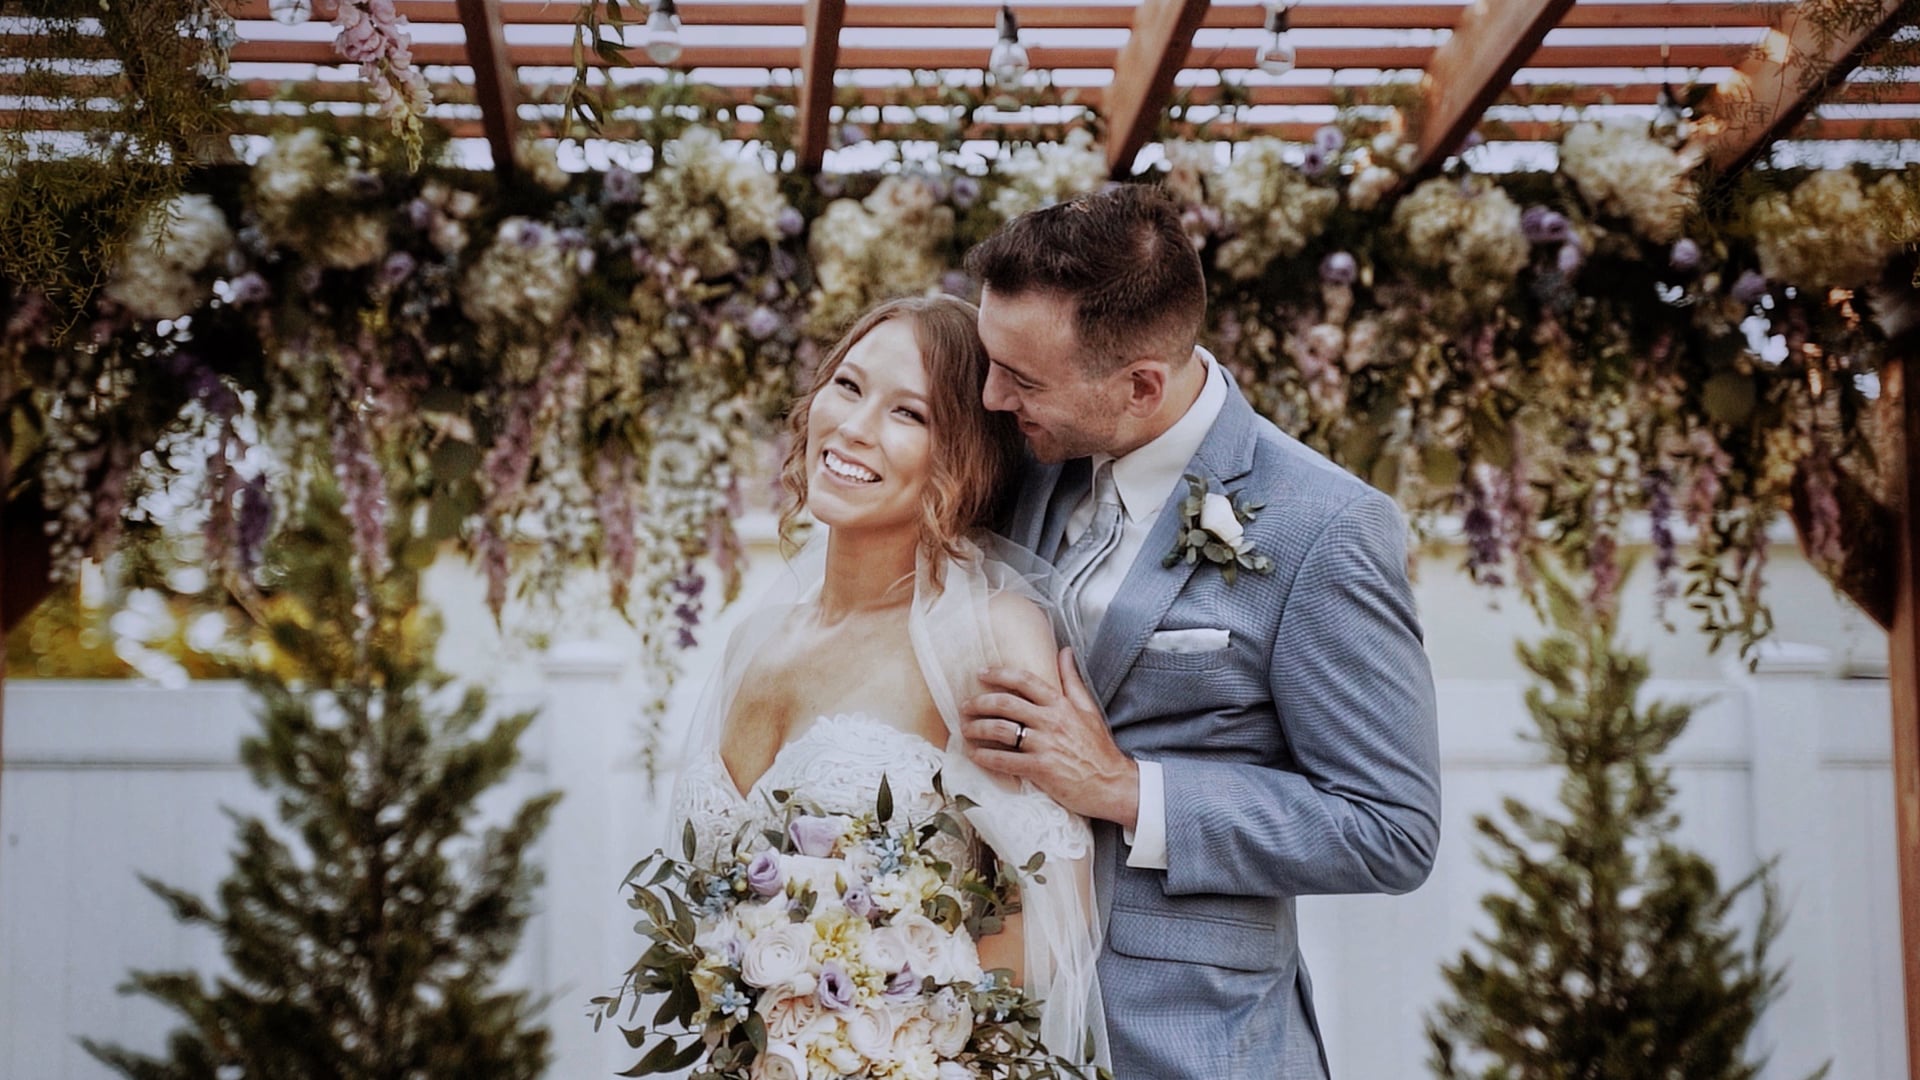 Shannon & Danny | July 9th, 2020